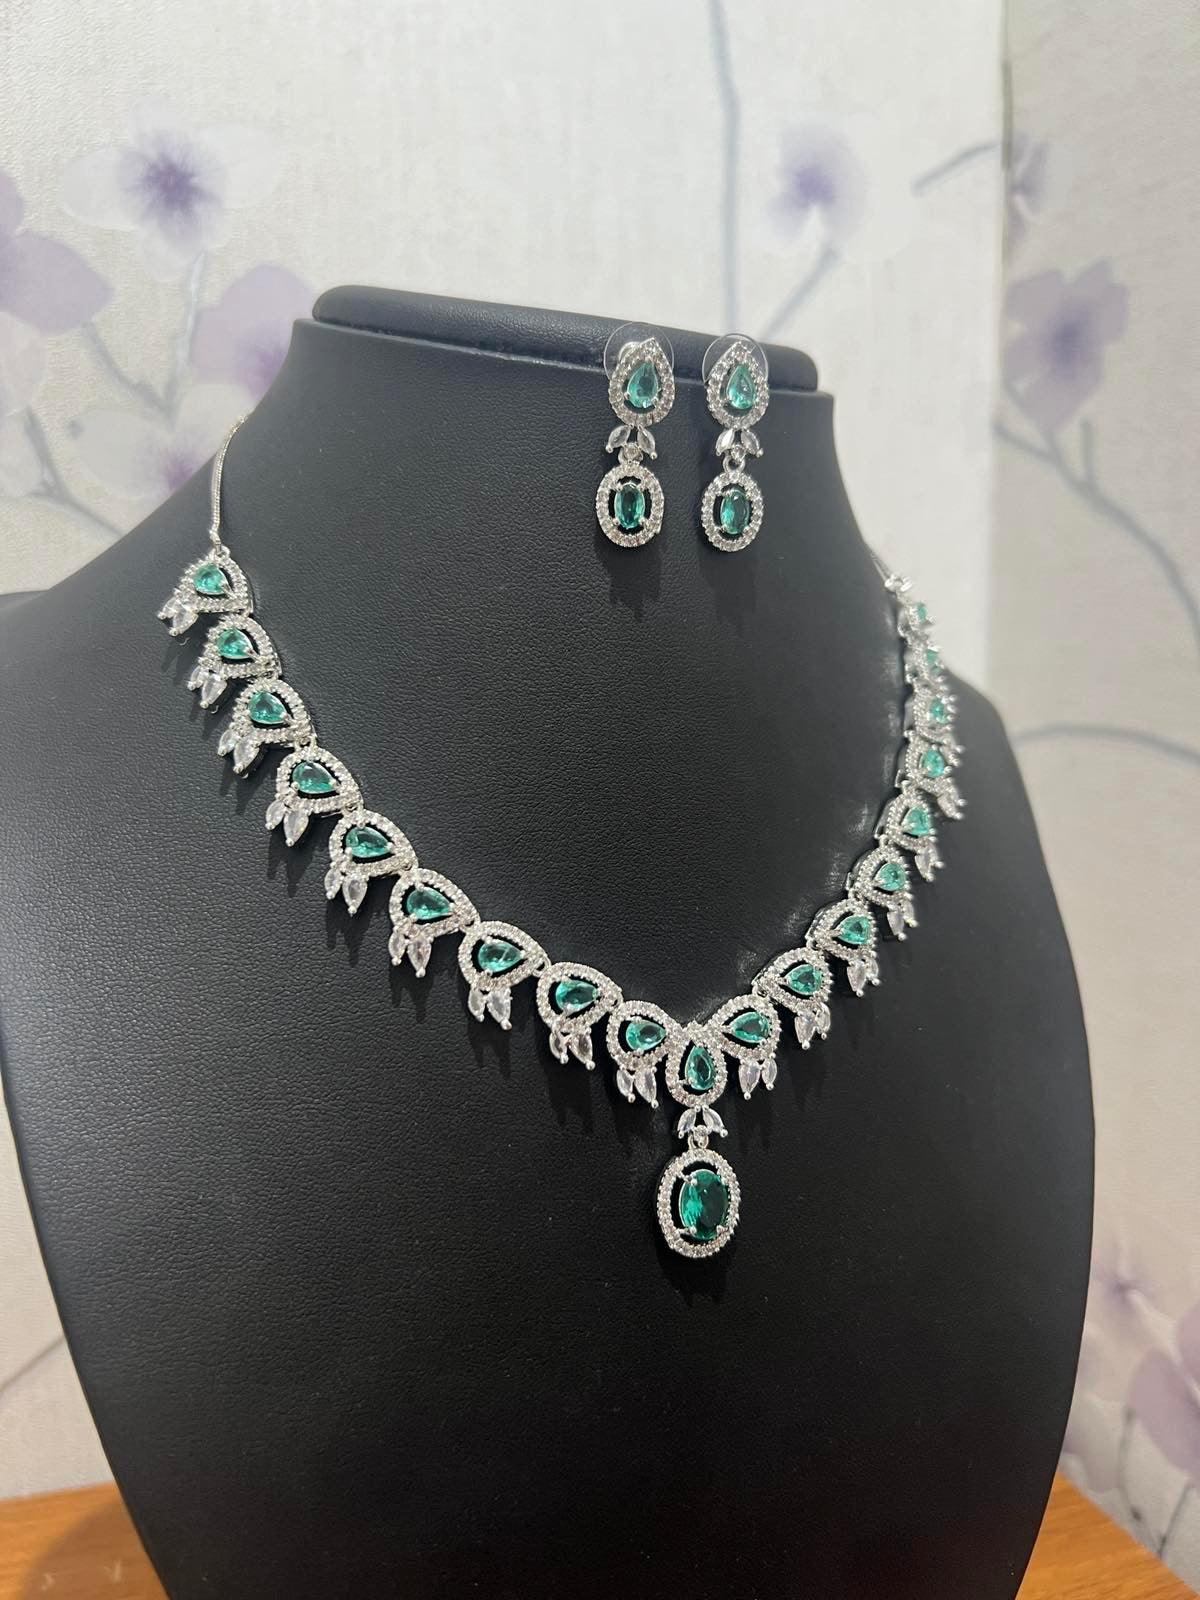 American Diamond Necklace with Light Green Stone - Boutique Nepal